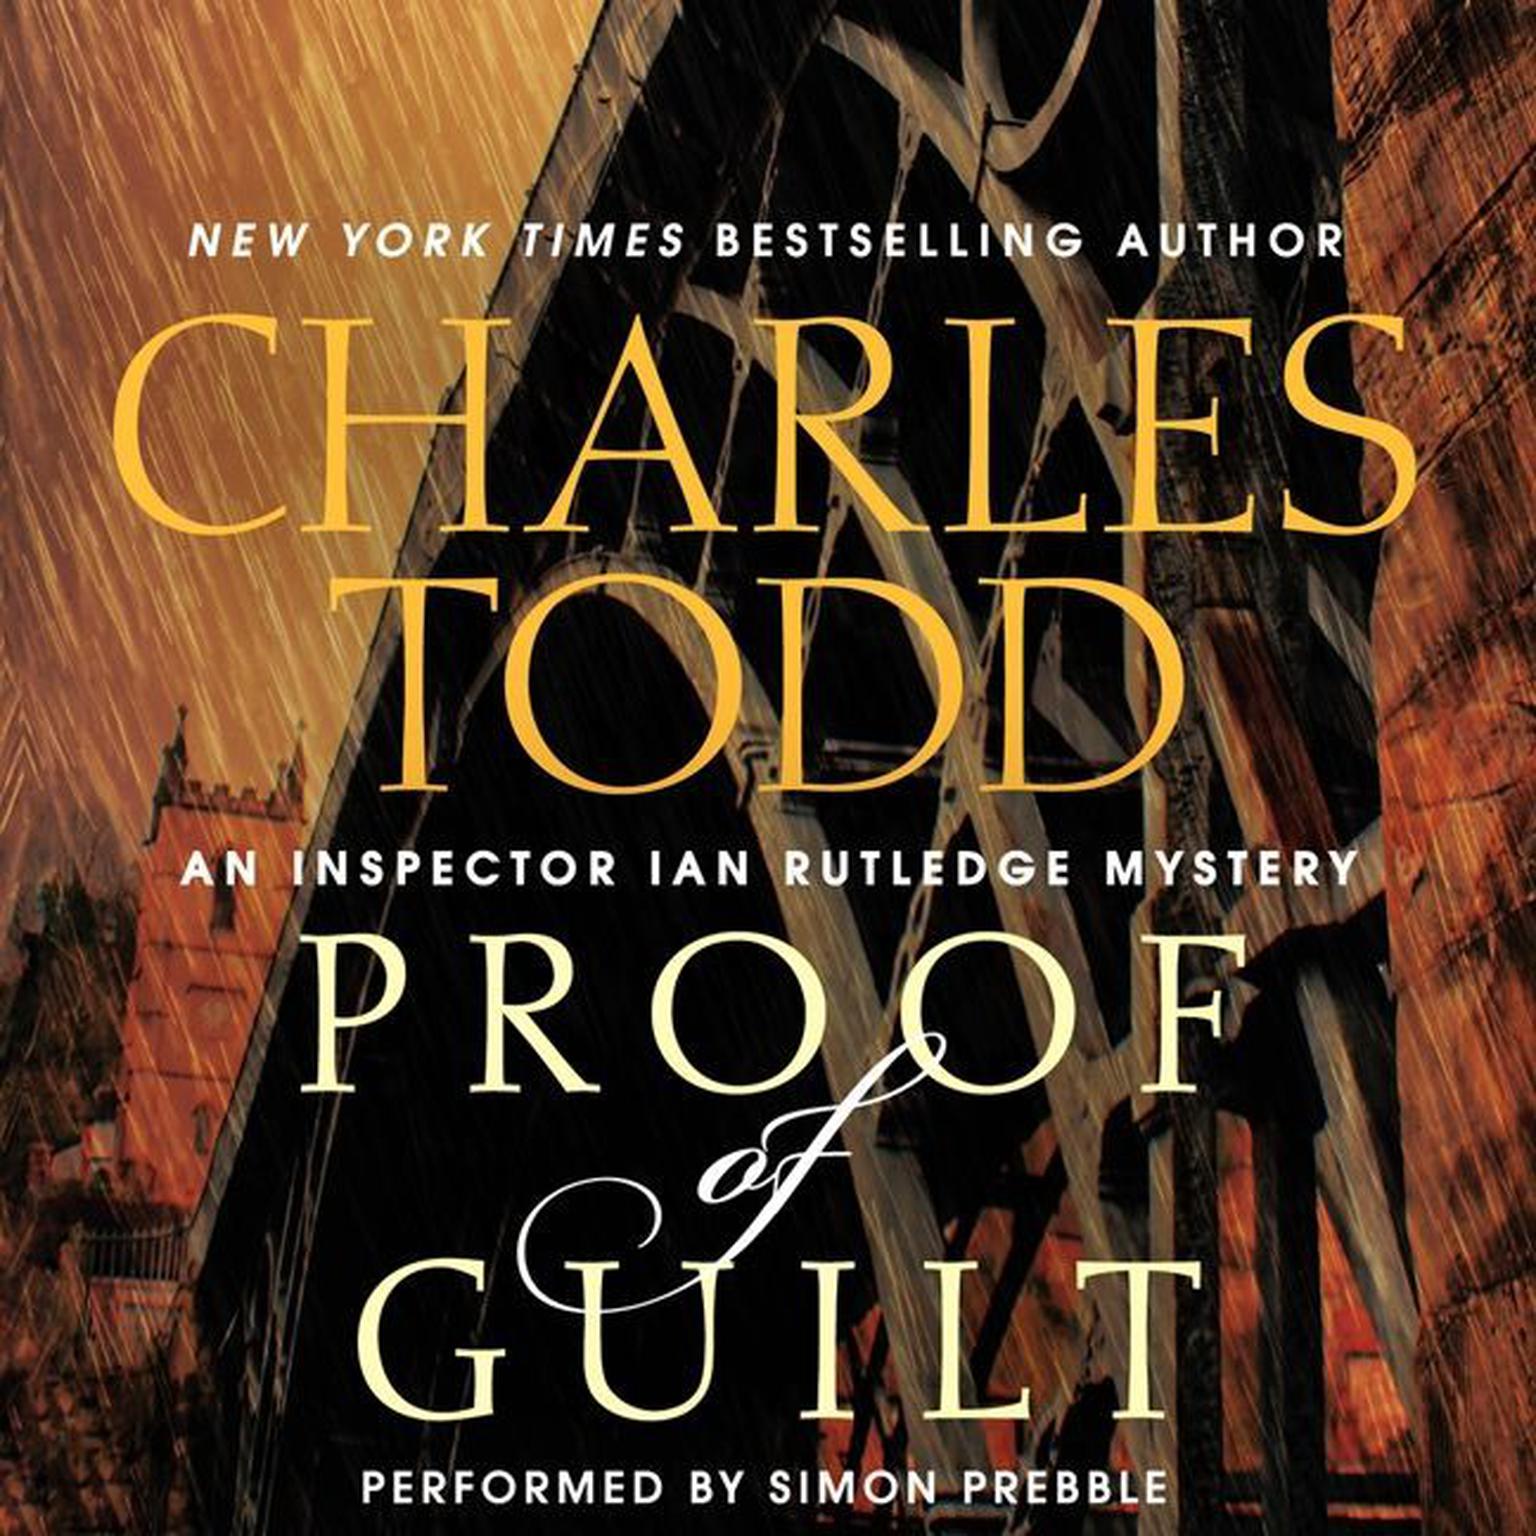 Proof of Guilt: An Inspector Ian Rutledge Mystery Audiobook, by Charles Todd